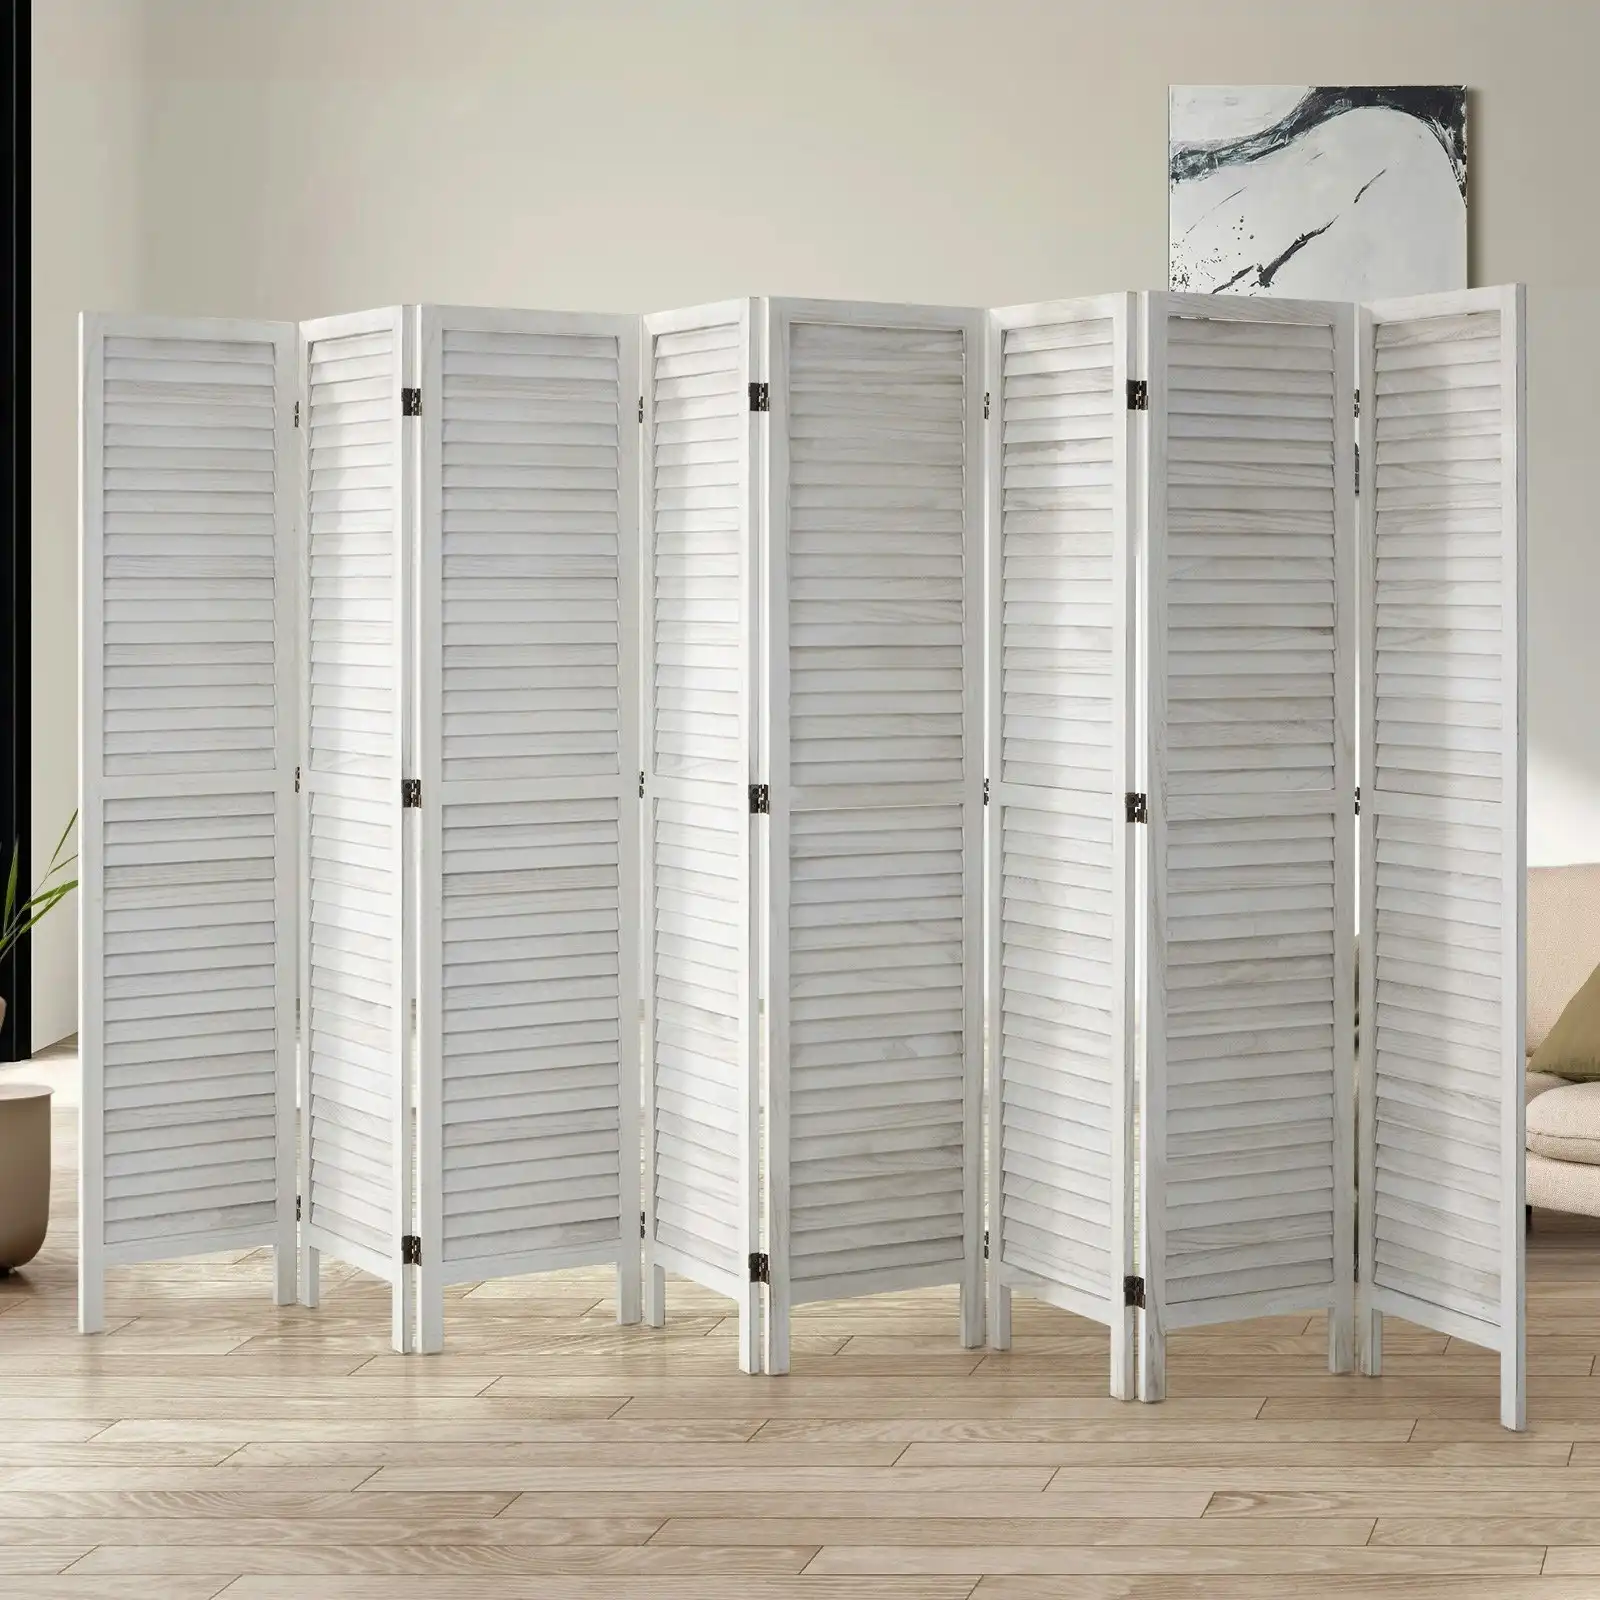 Oikiture 8 Panel Room Divider Privacy Screen Partition Timber Wooden Fold White